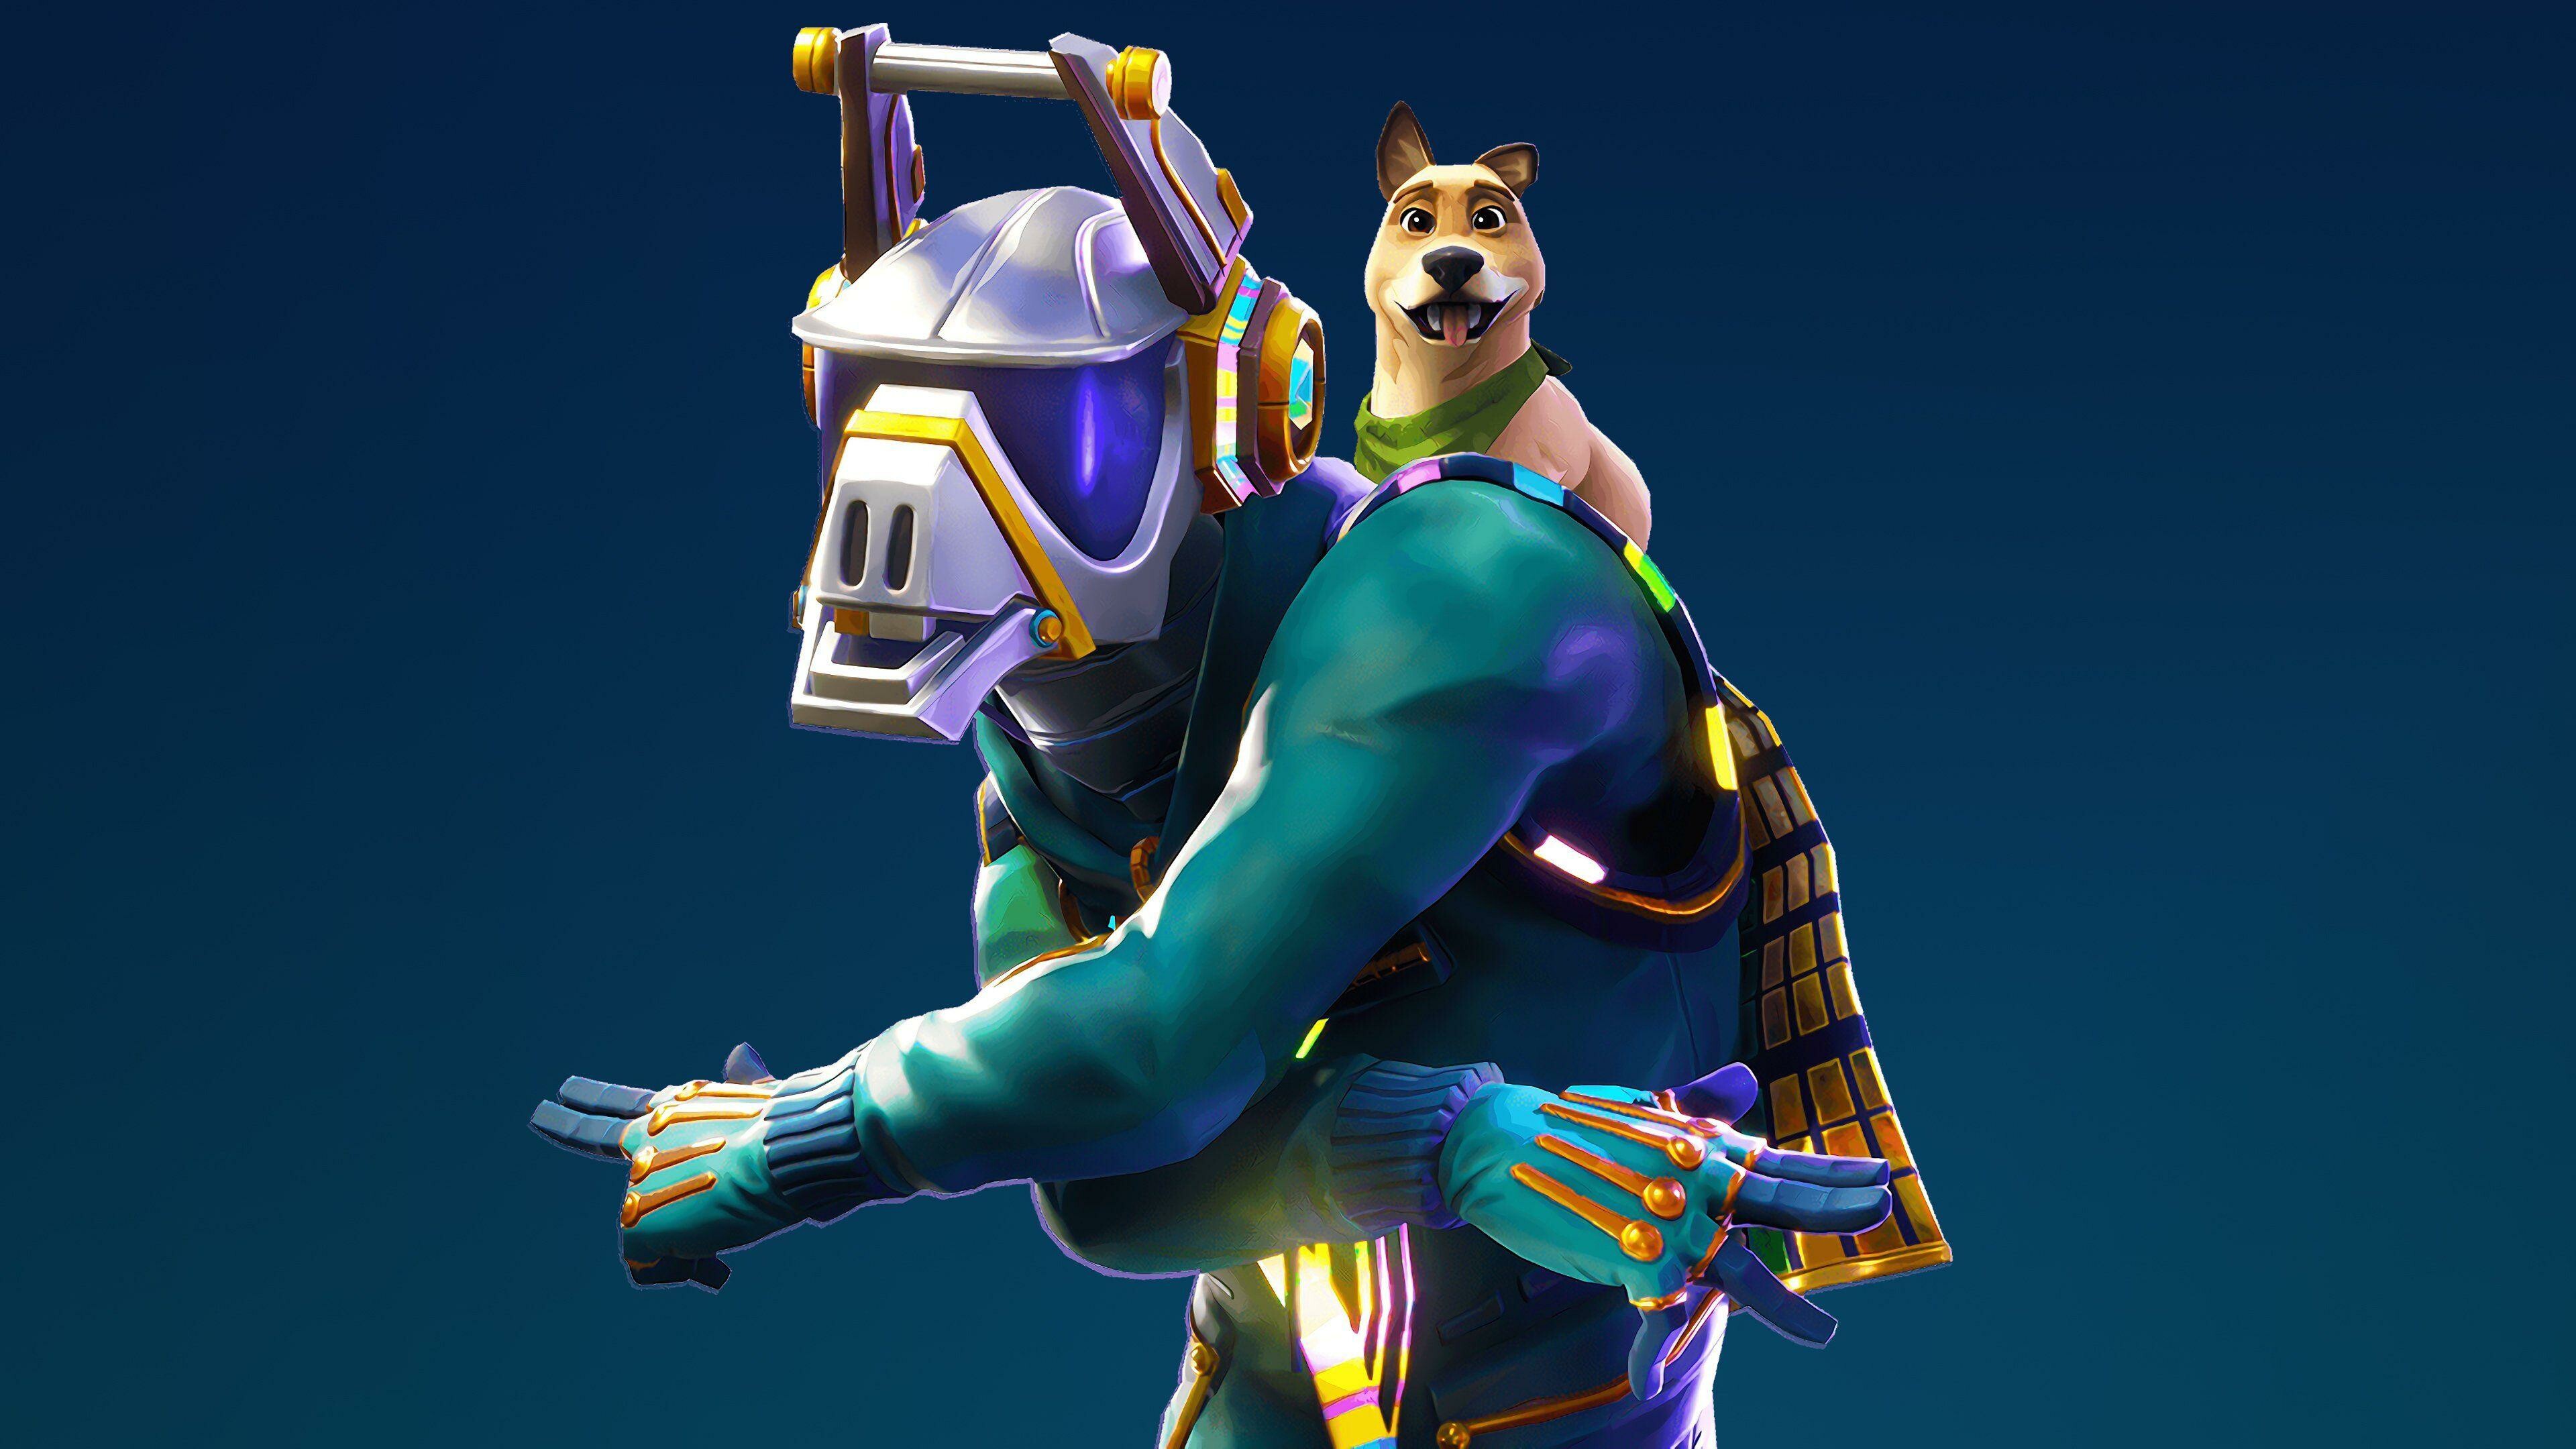 Fortnite: DJ Yonder, The first Epic skin to get from the Season 6 Battle Pass. 3840x2160 4K Wallpaper.